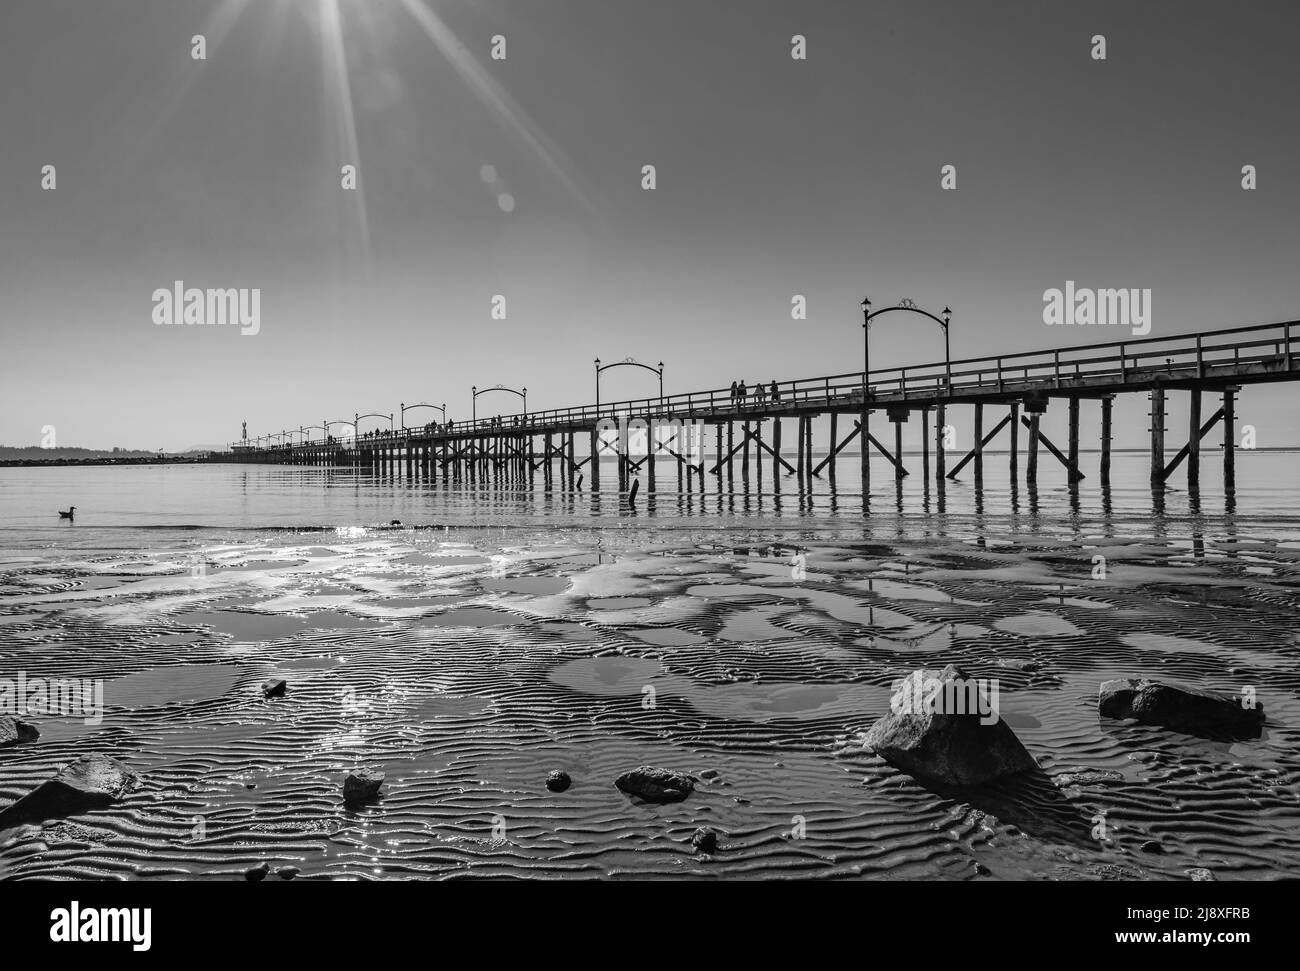 Wooden pier at White Rock, BC extends diagonally into image. Twinkling lights reflected in the sea. Black and white image: Beach and pier at sunset, S Stock Photo